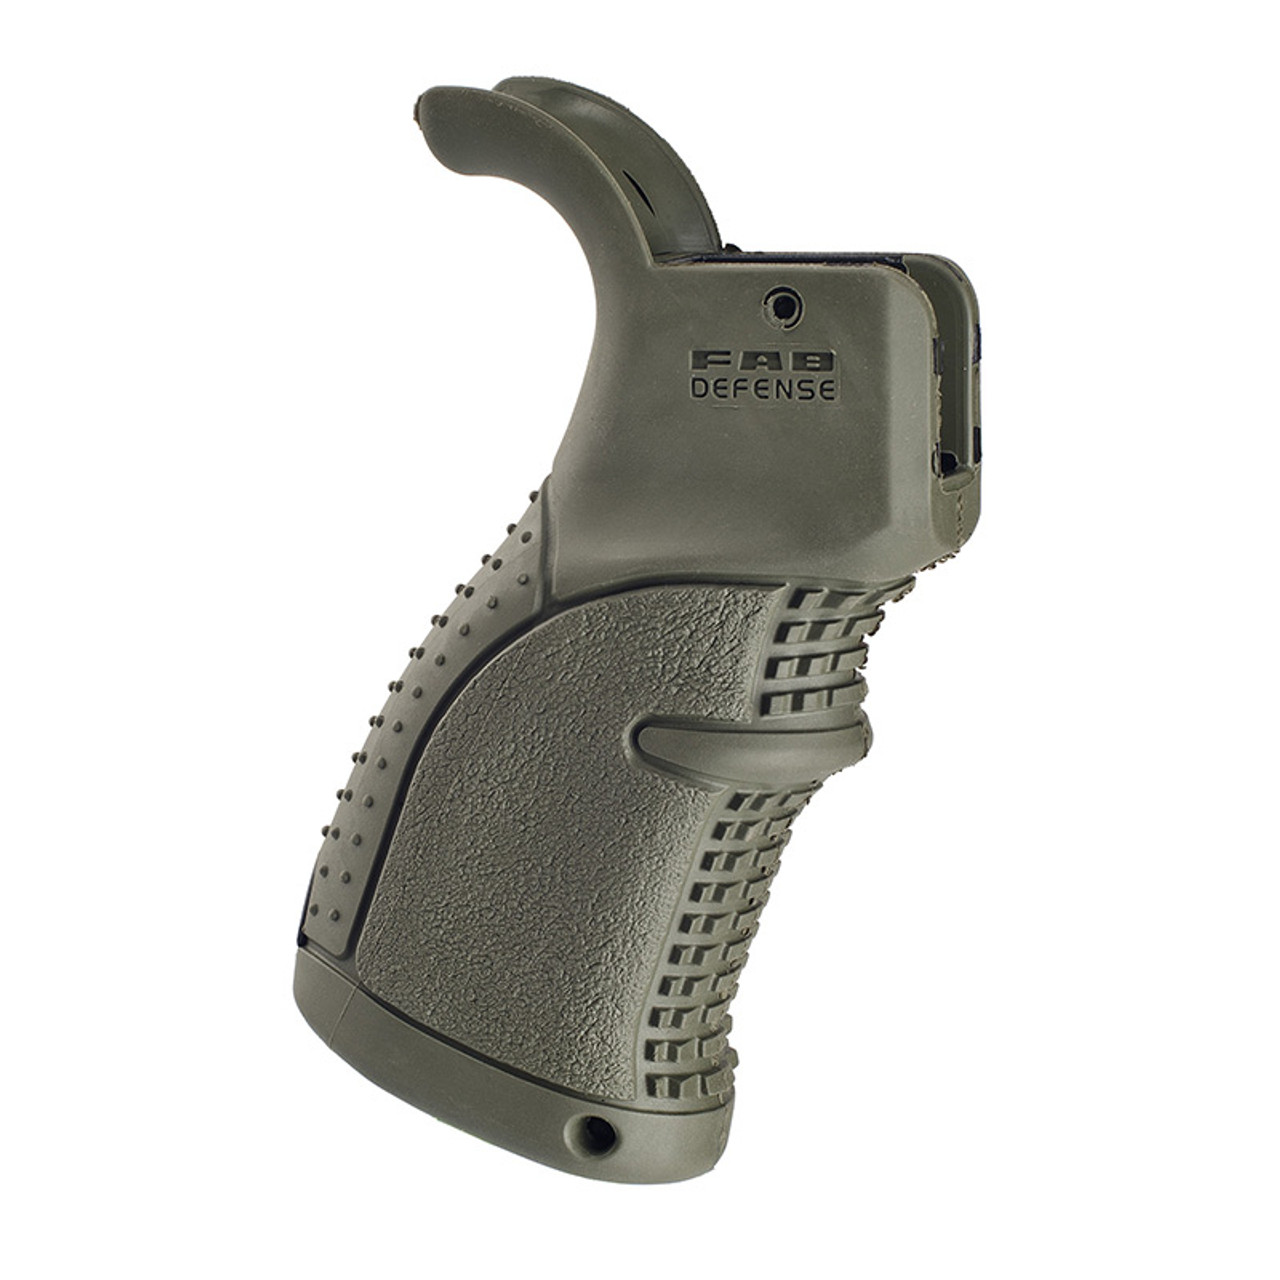 VZ Grips  The Finest Gun Grips On The Planet